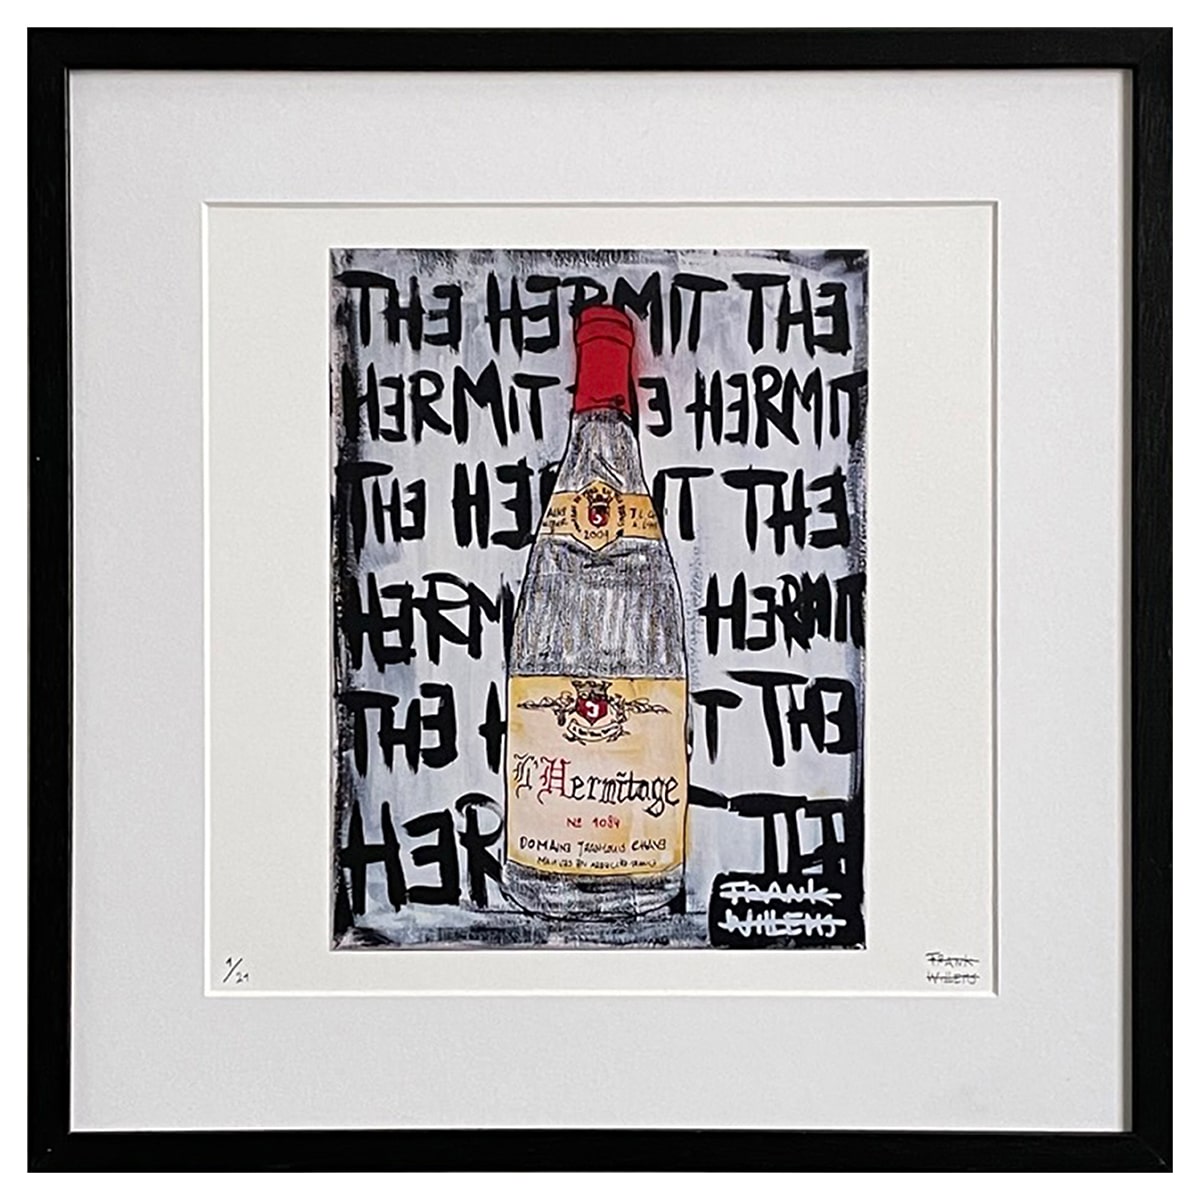 Limited Edt Art Prints - L’HERMITAGE - THE HERMIT - Frank Willems